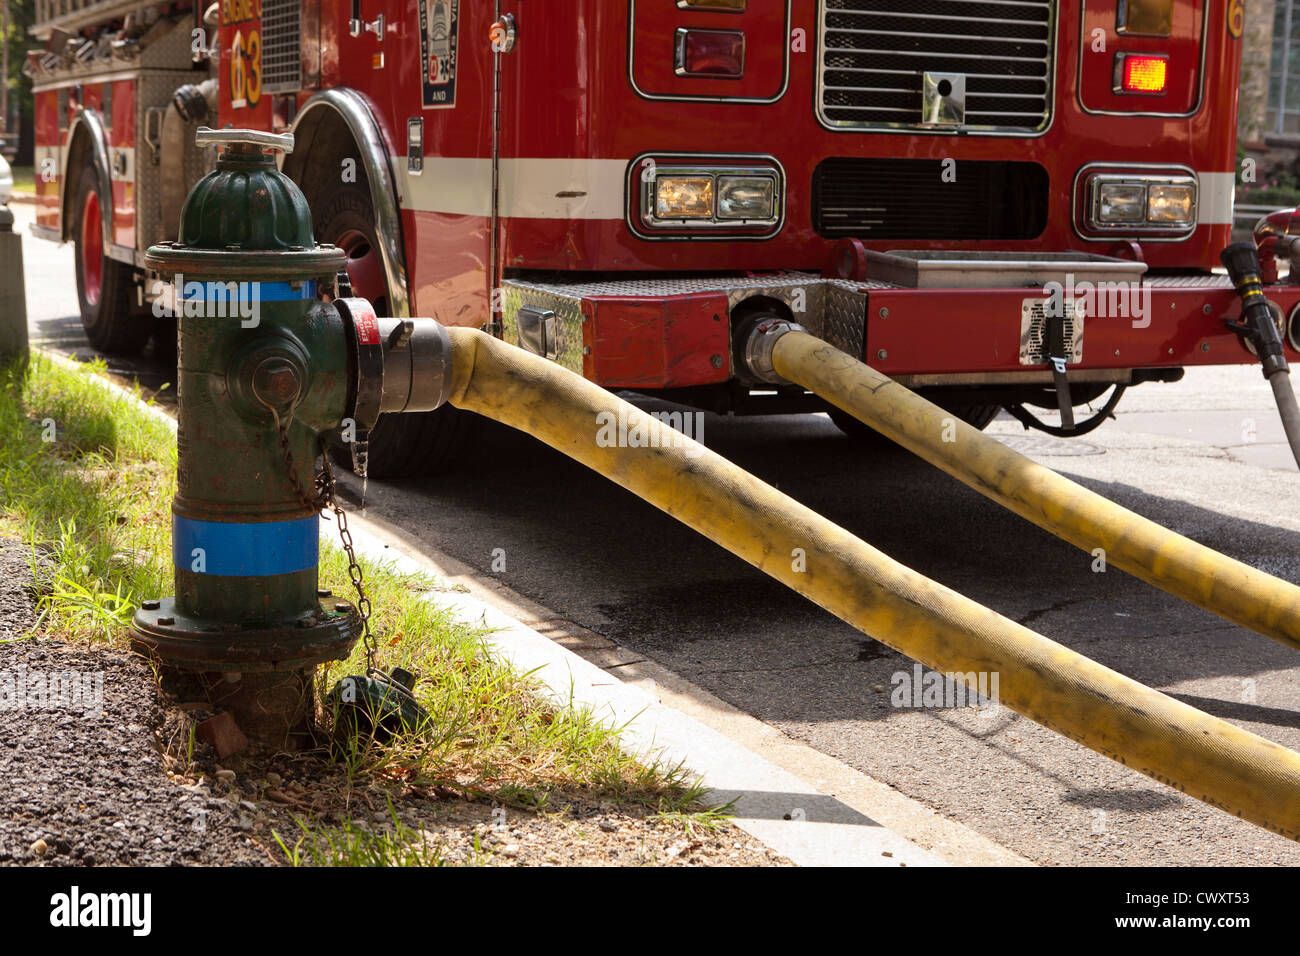 Firetruck hose mounted on hydrant Stock Photo